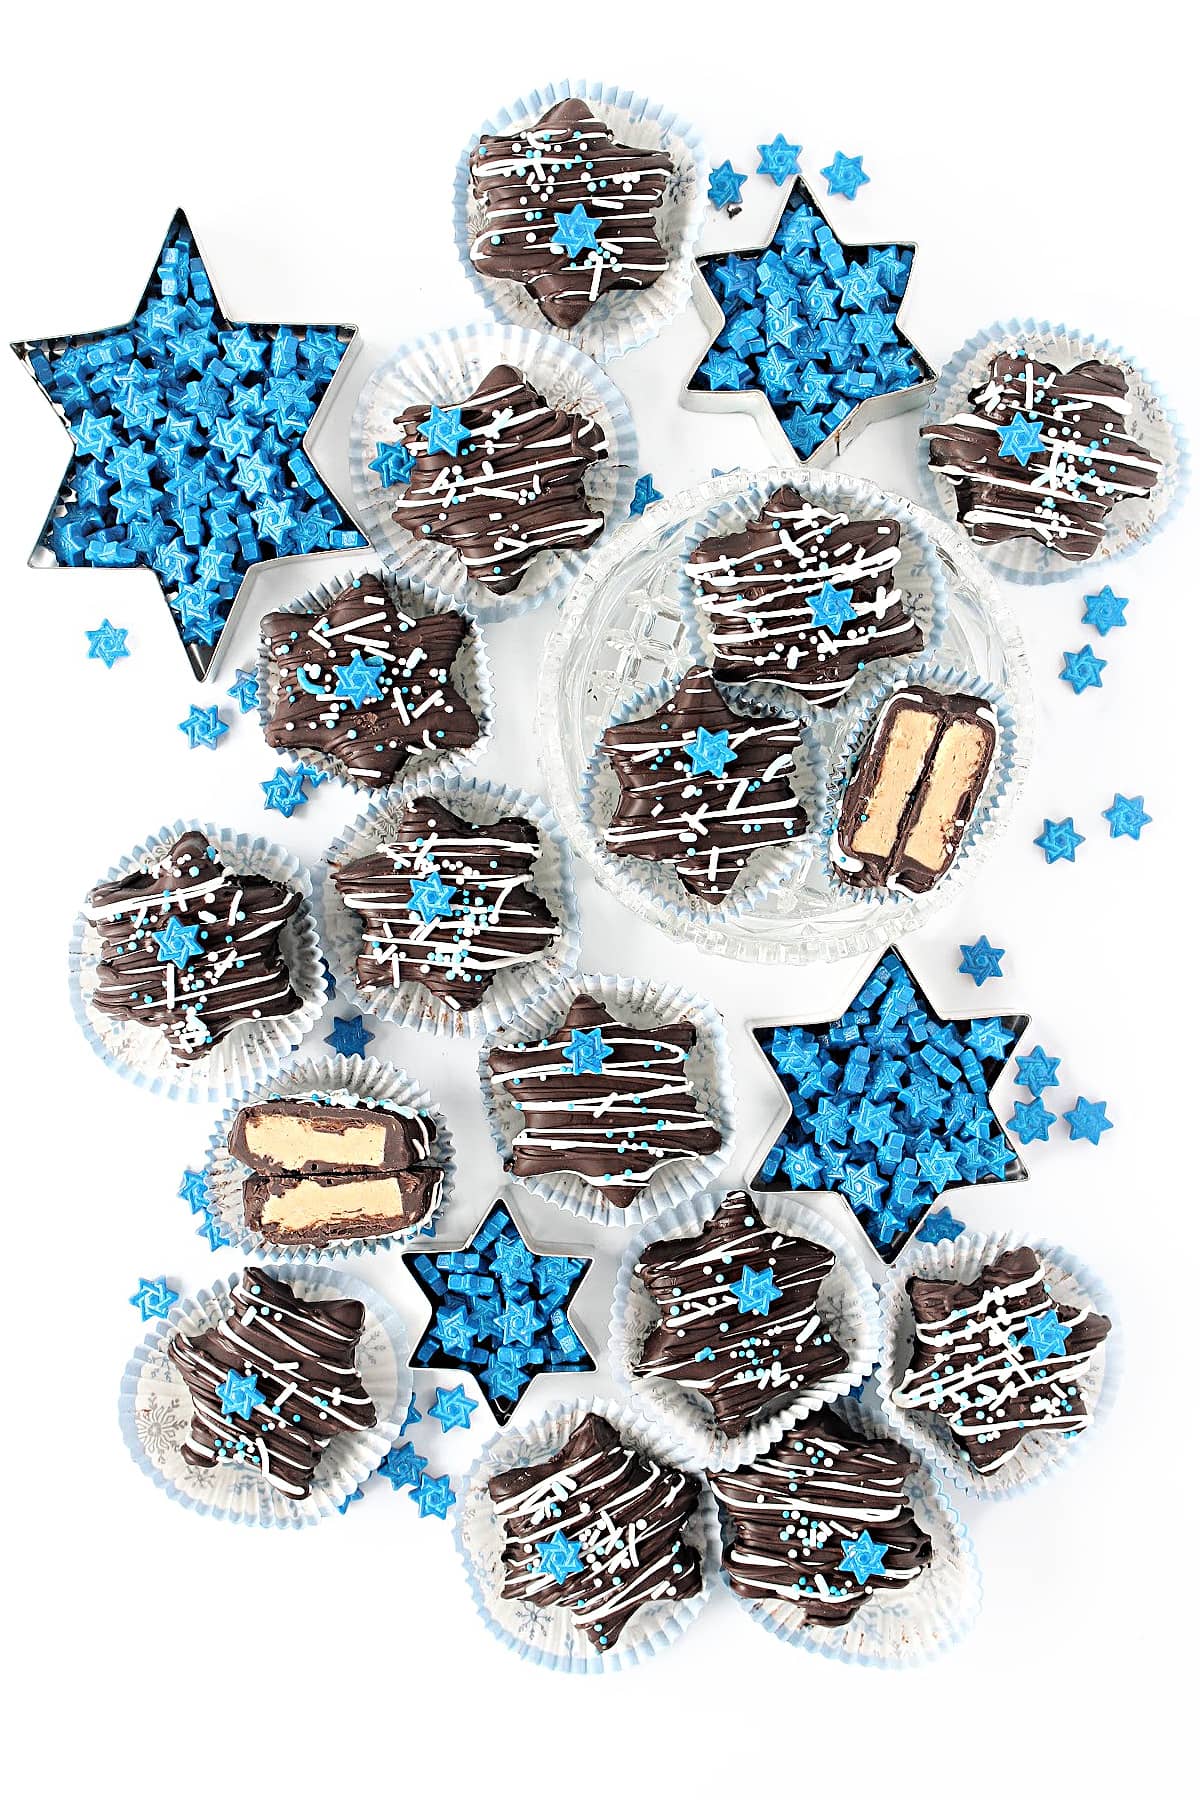 Star shaped Chocolate Peanut Butter candies with blue and white sprinkles.